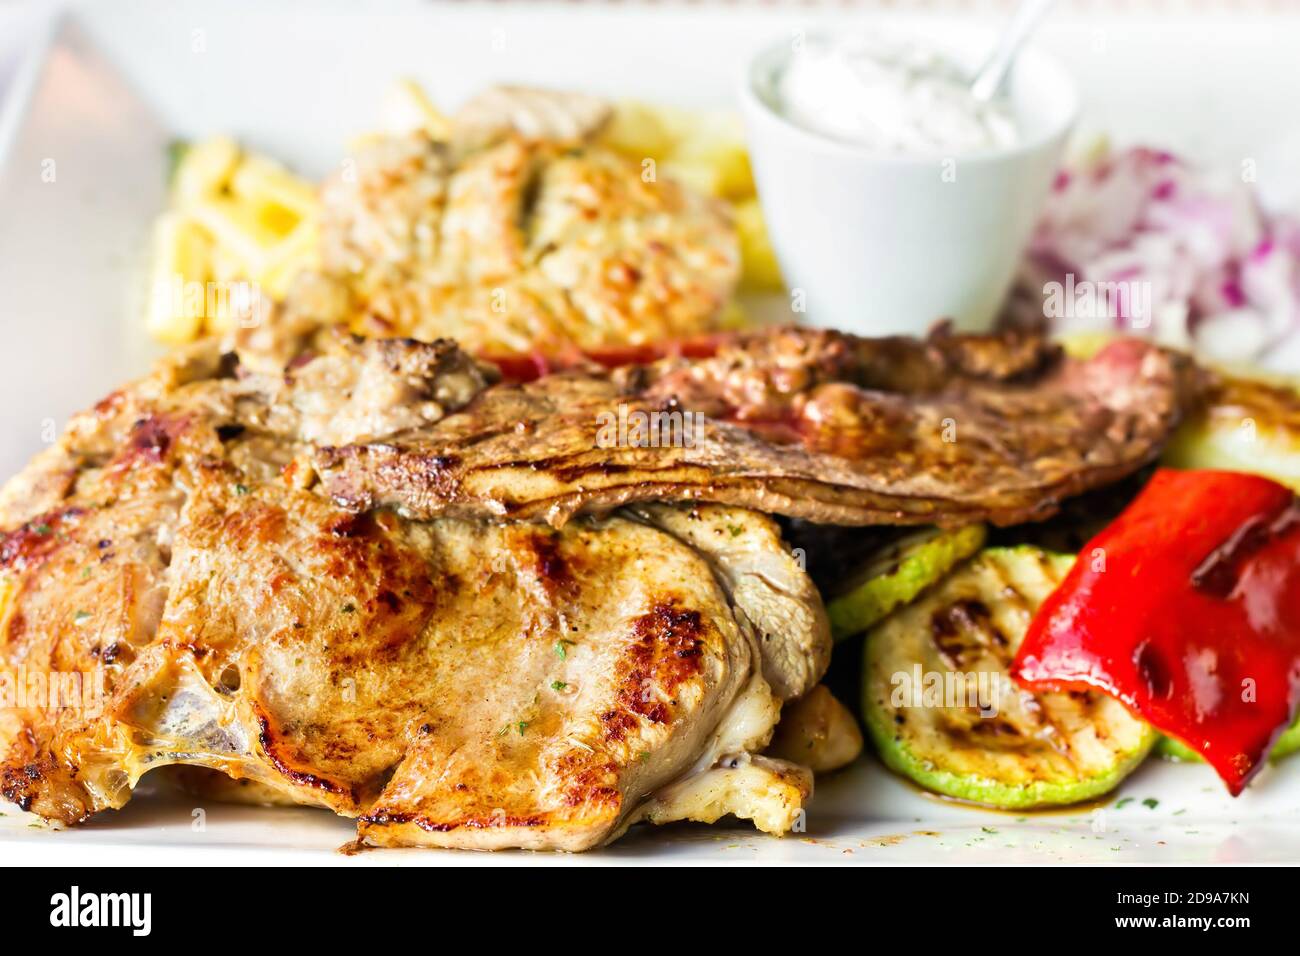 Traditional Balkan mixed grill dish - different types of bbq meat and vegetables with fries, selective focus Stock Photo